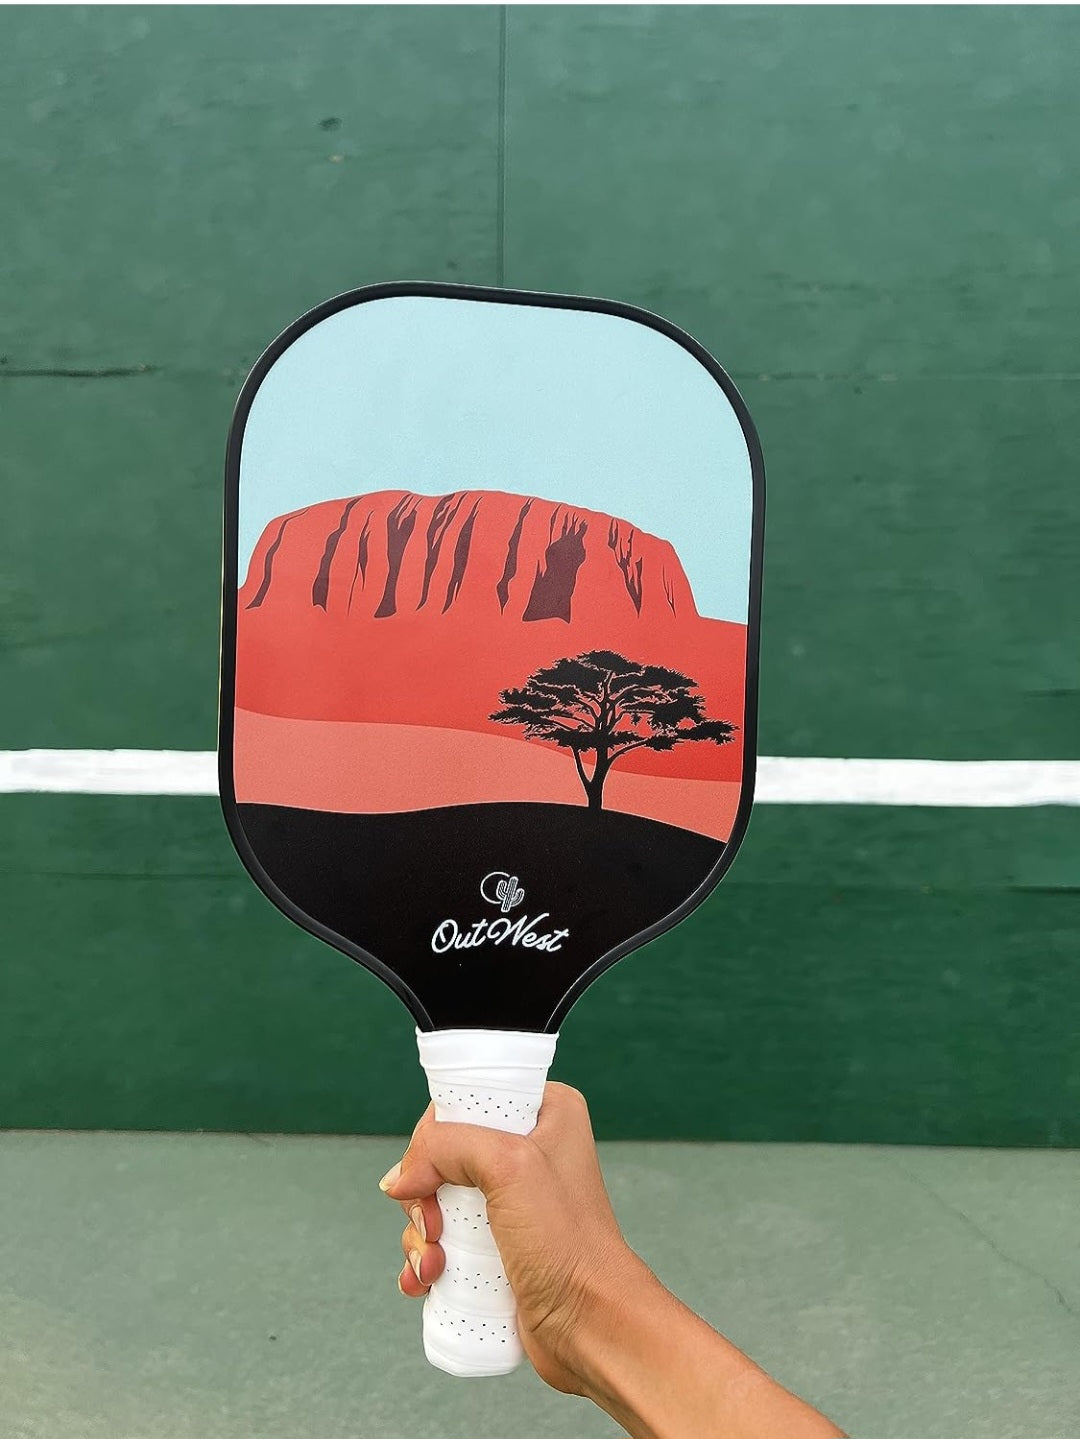 OutWest Sport Pickleball Paddle - The Outback, USAPA Approved